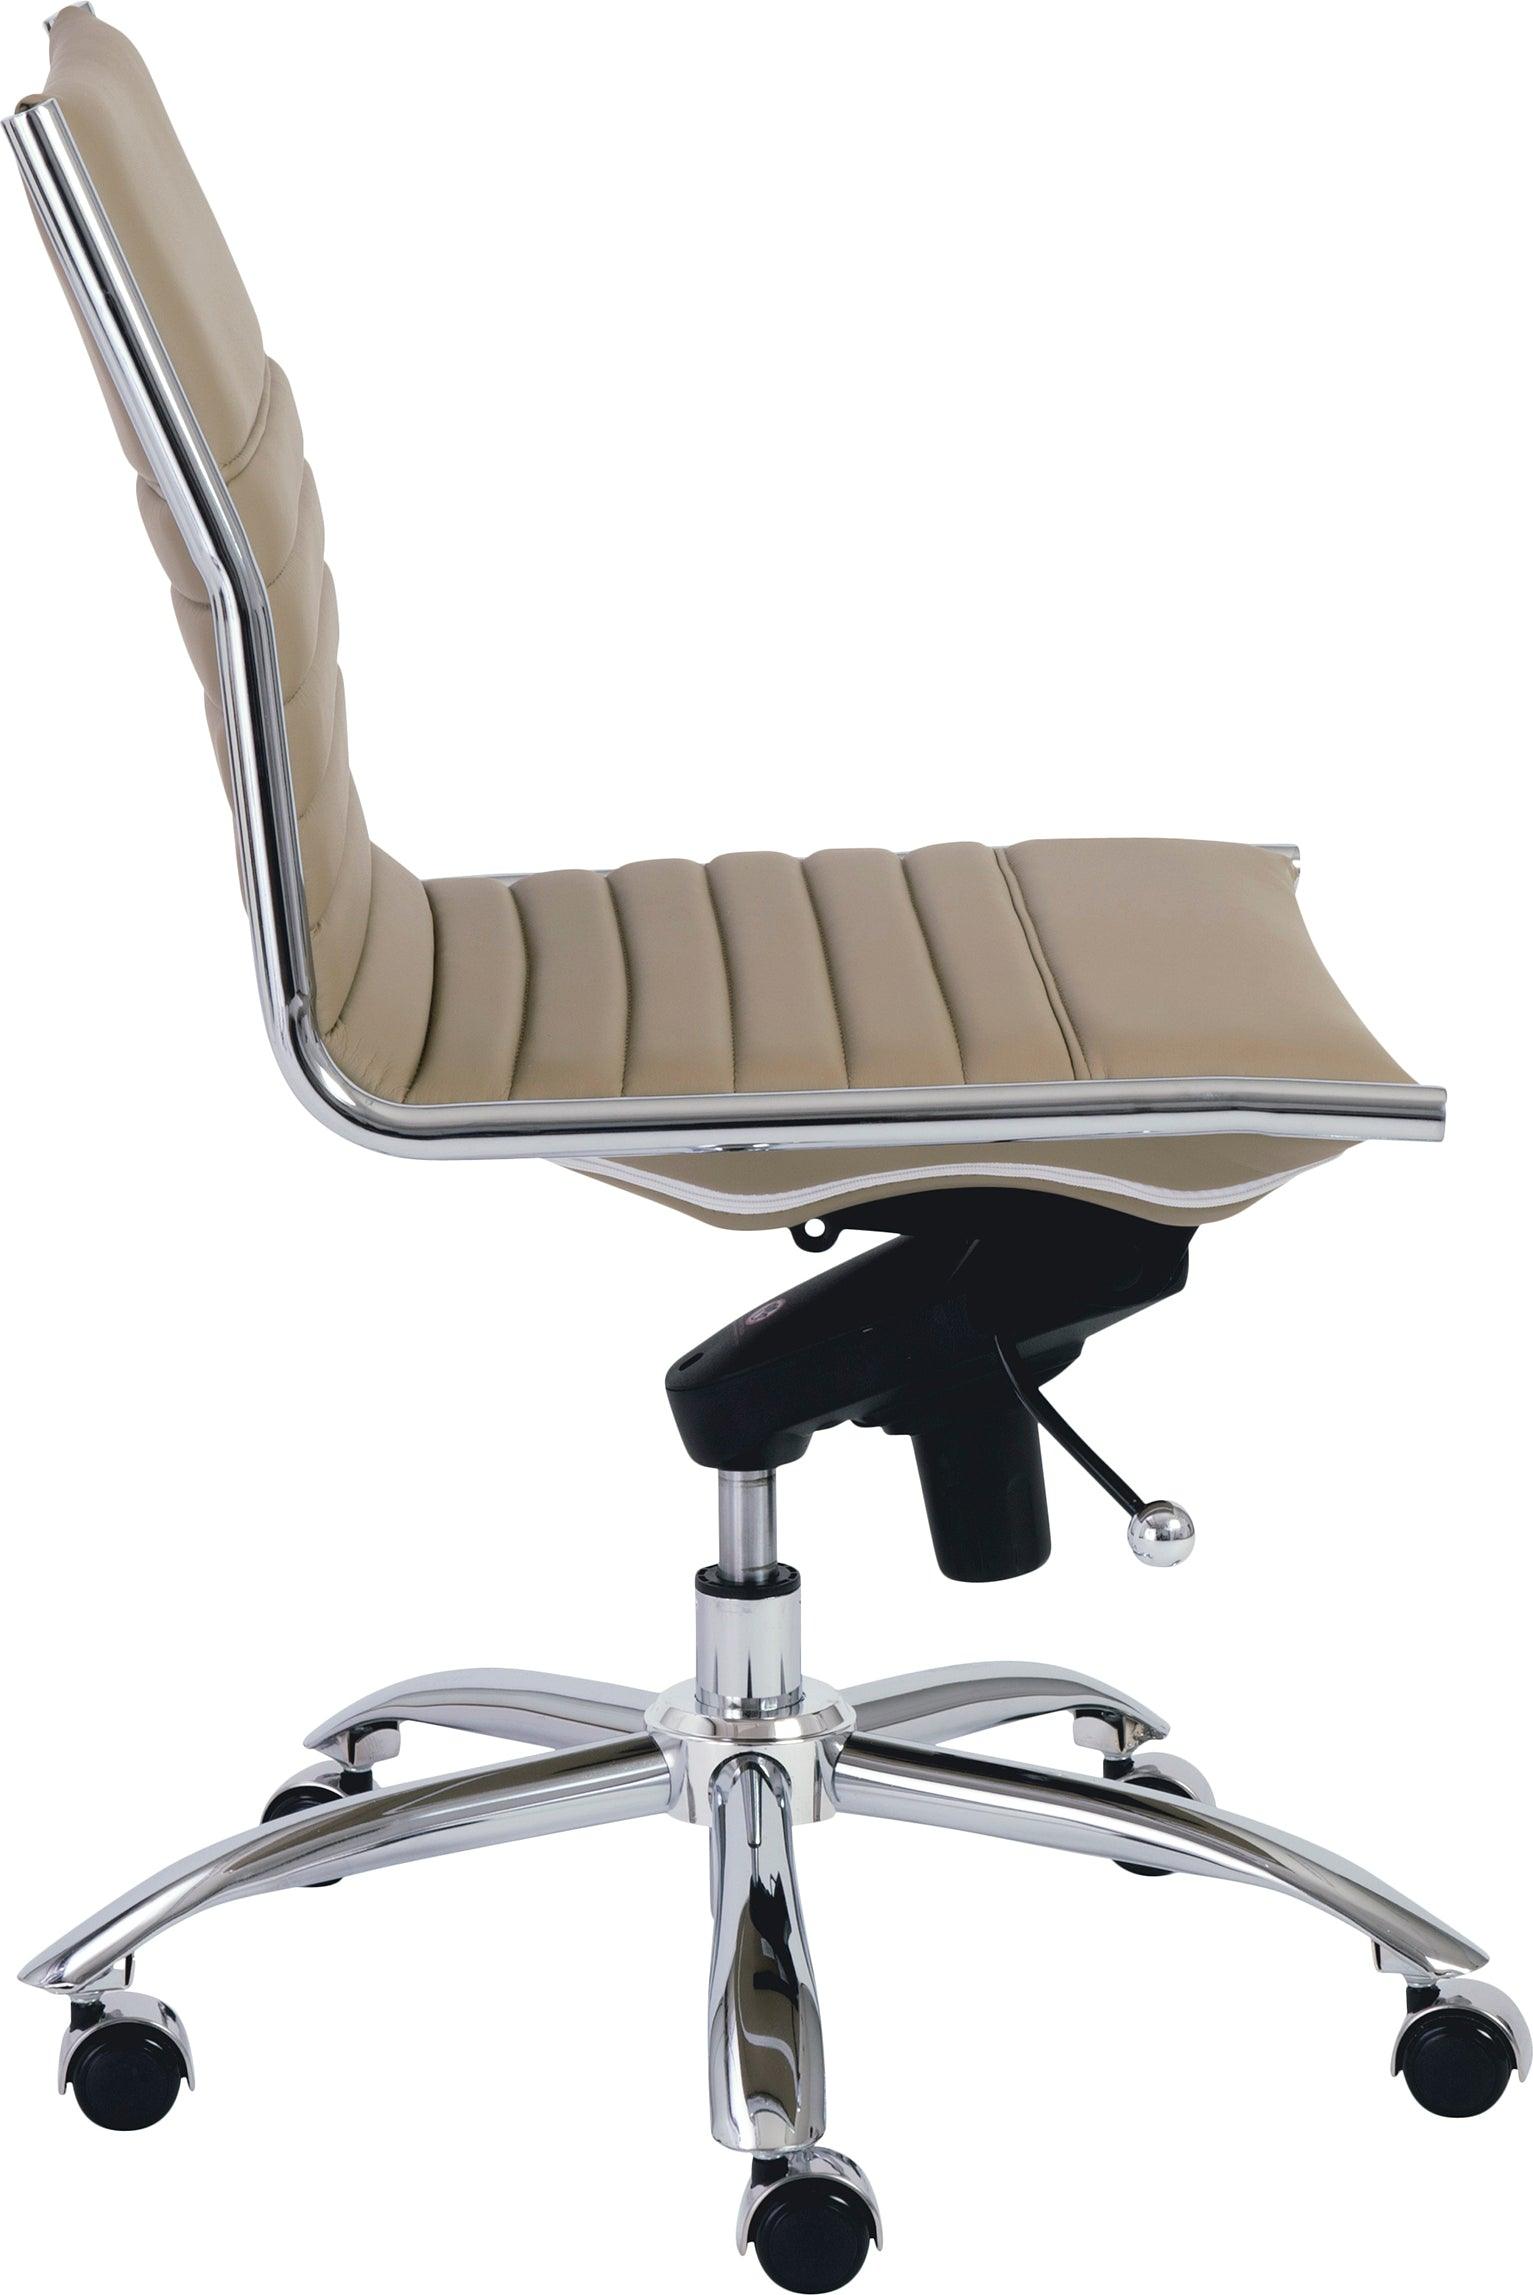 Dirk Taupe Leatherette Low Back Adjustable Office Chair - #5K196